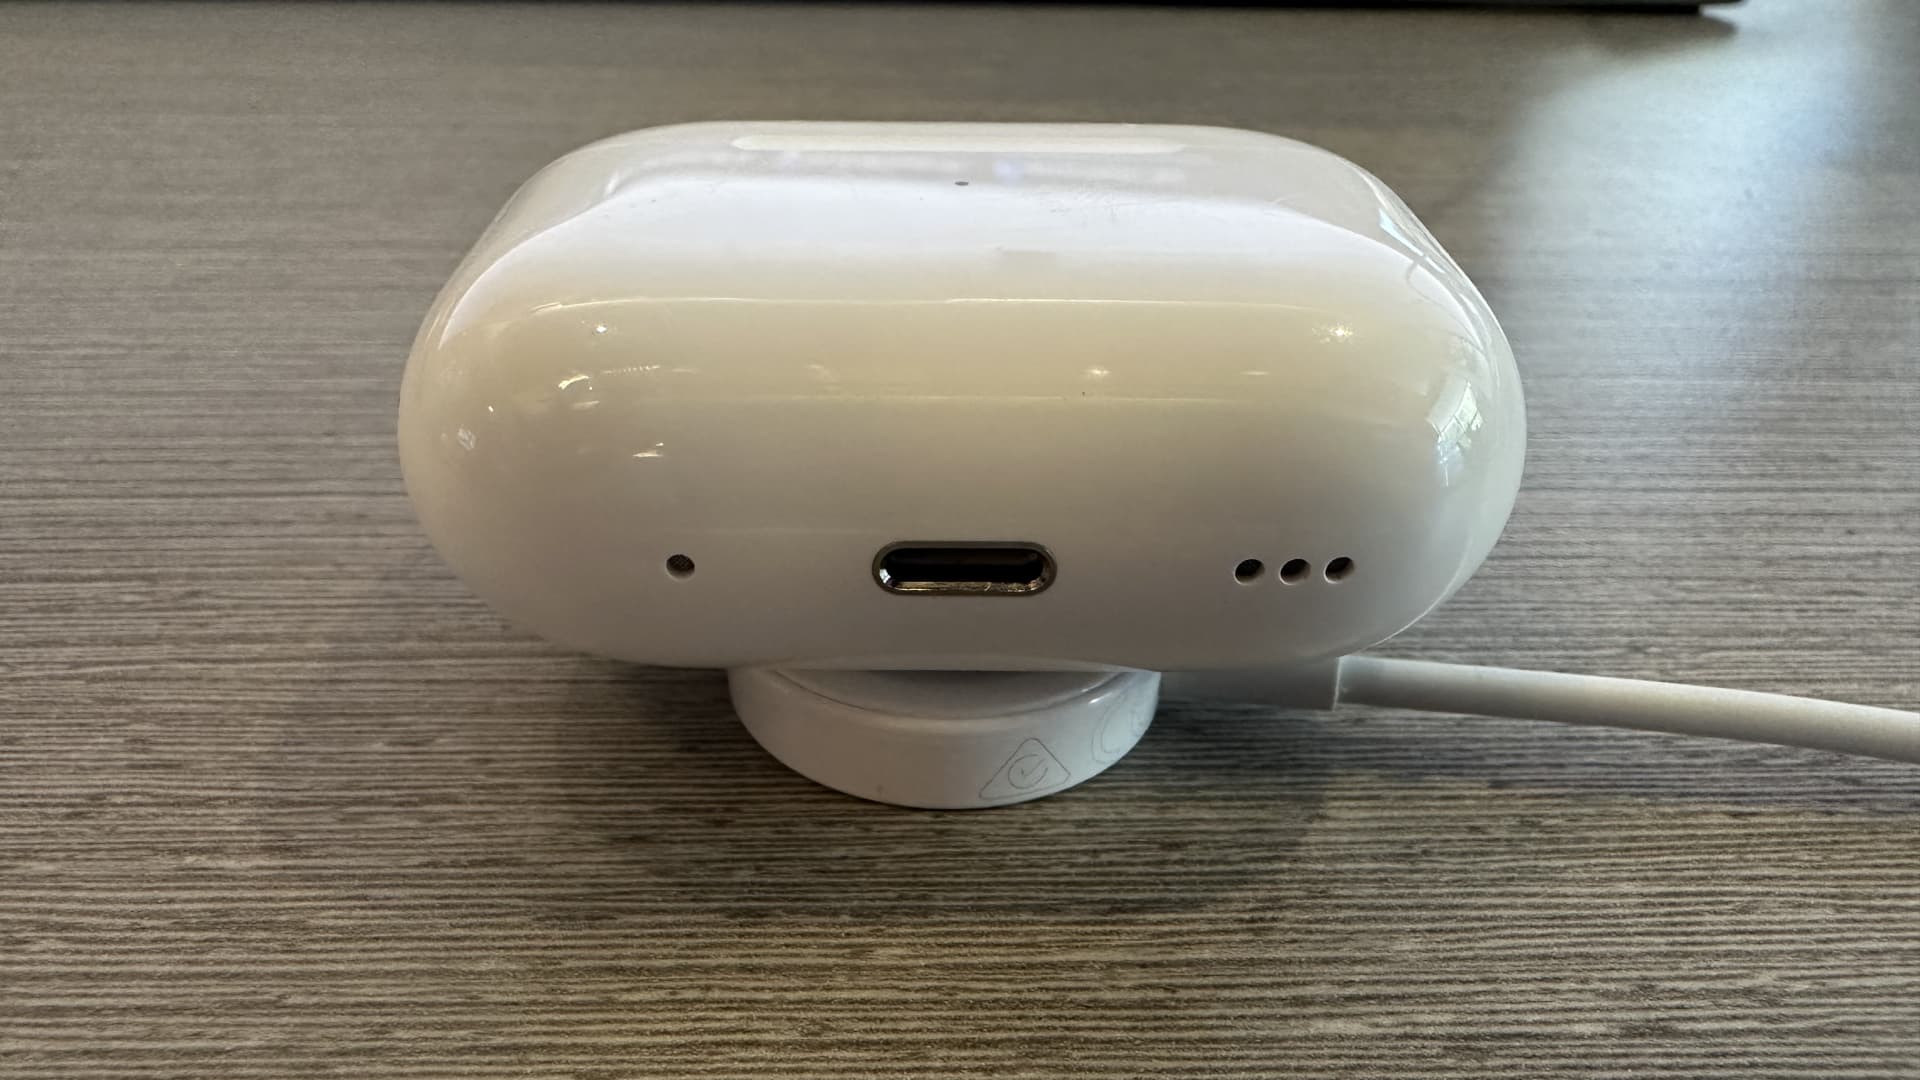 You can now charge AirPods Pro (2nd generation) with your Apple Watch charger.